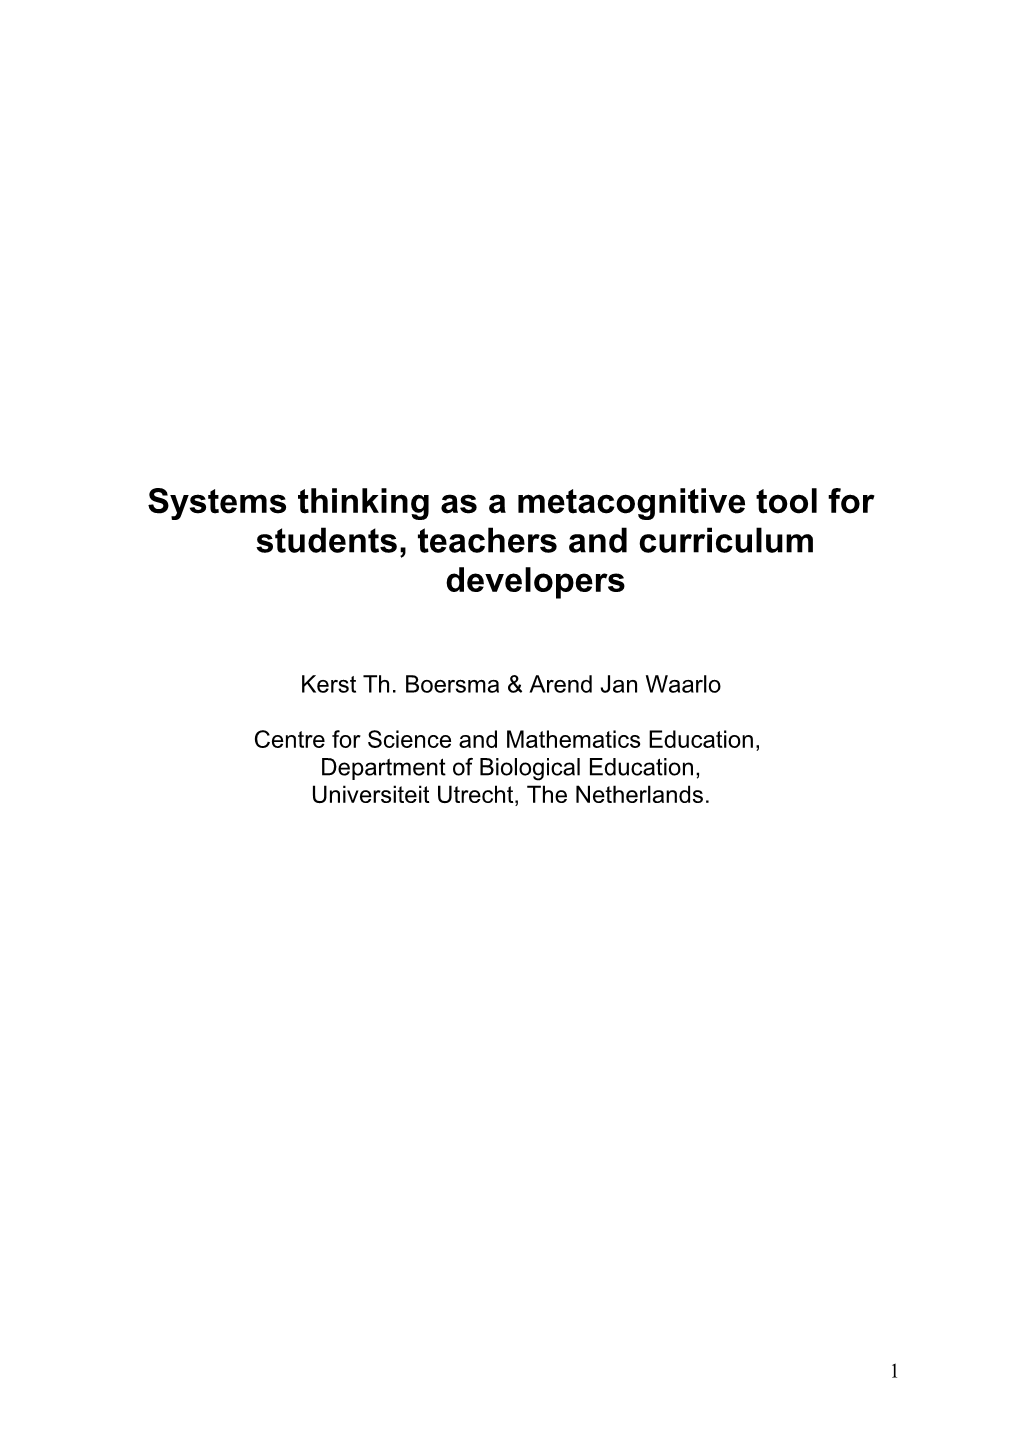 Systems Thinking As a Metacognitive Tool for Students, Teachers and Curriculum Developers